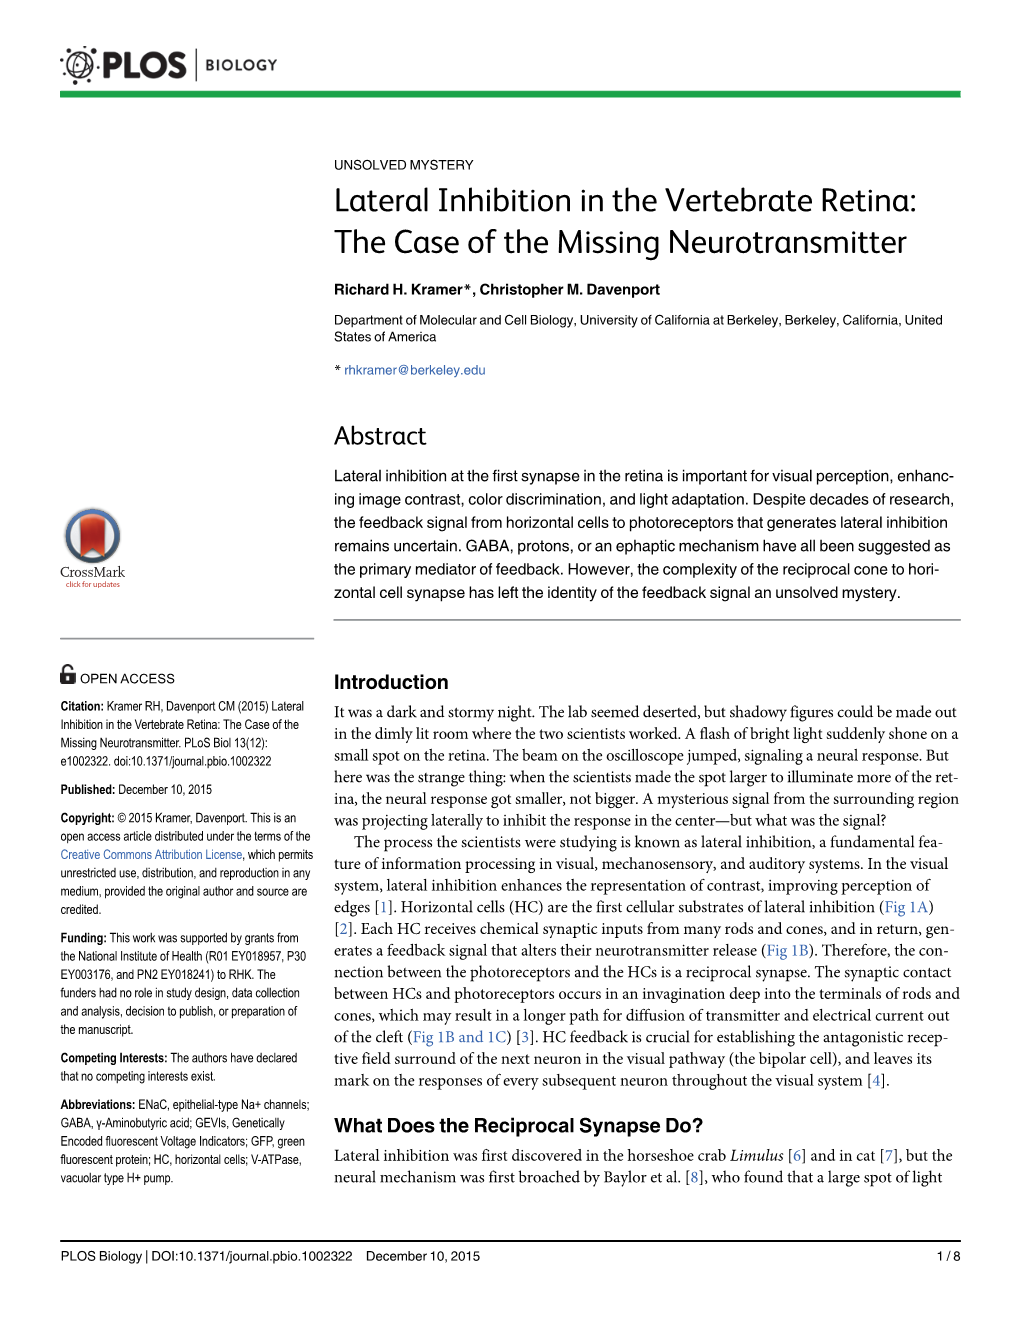 Lateral Inhibition in the Vertebrate Retina: the Case of the Missing Neurotransmitter